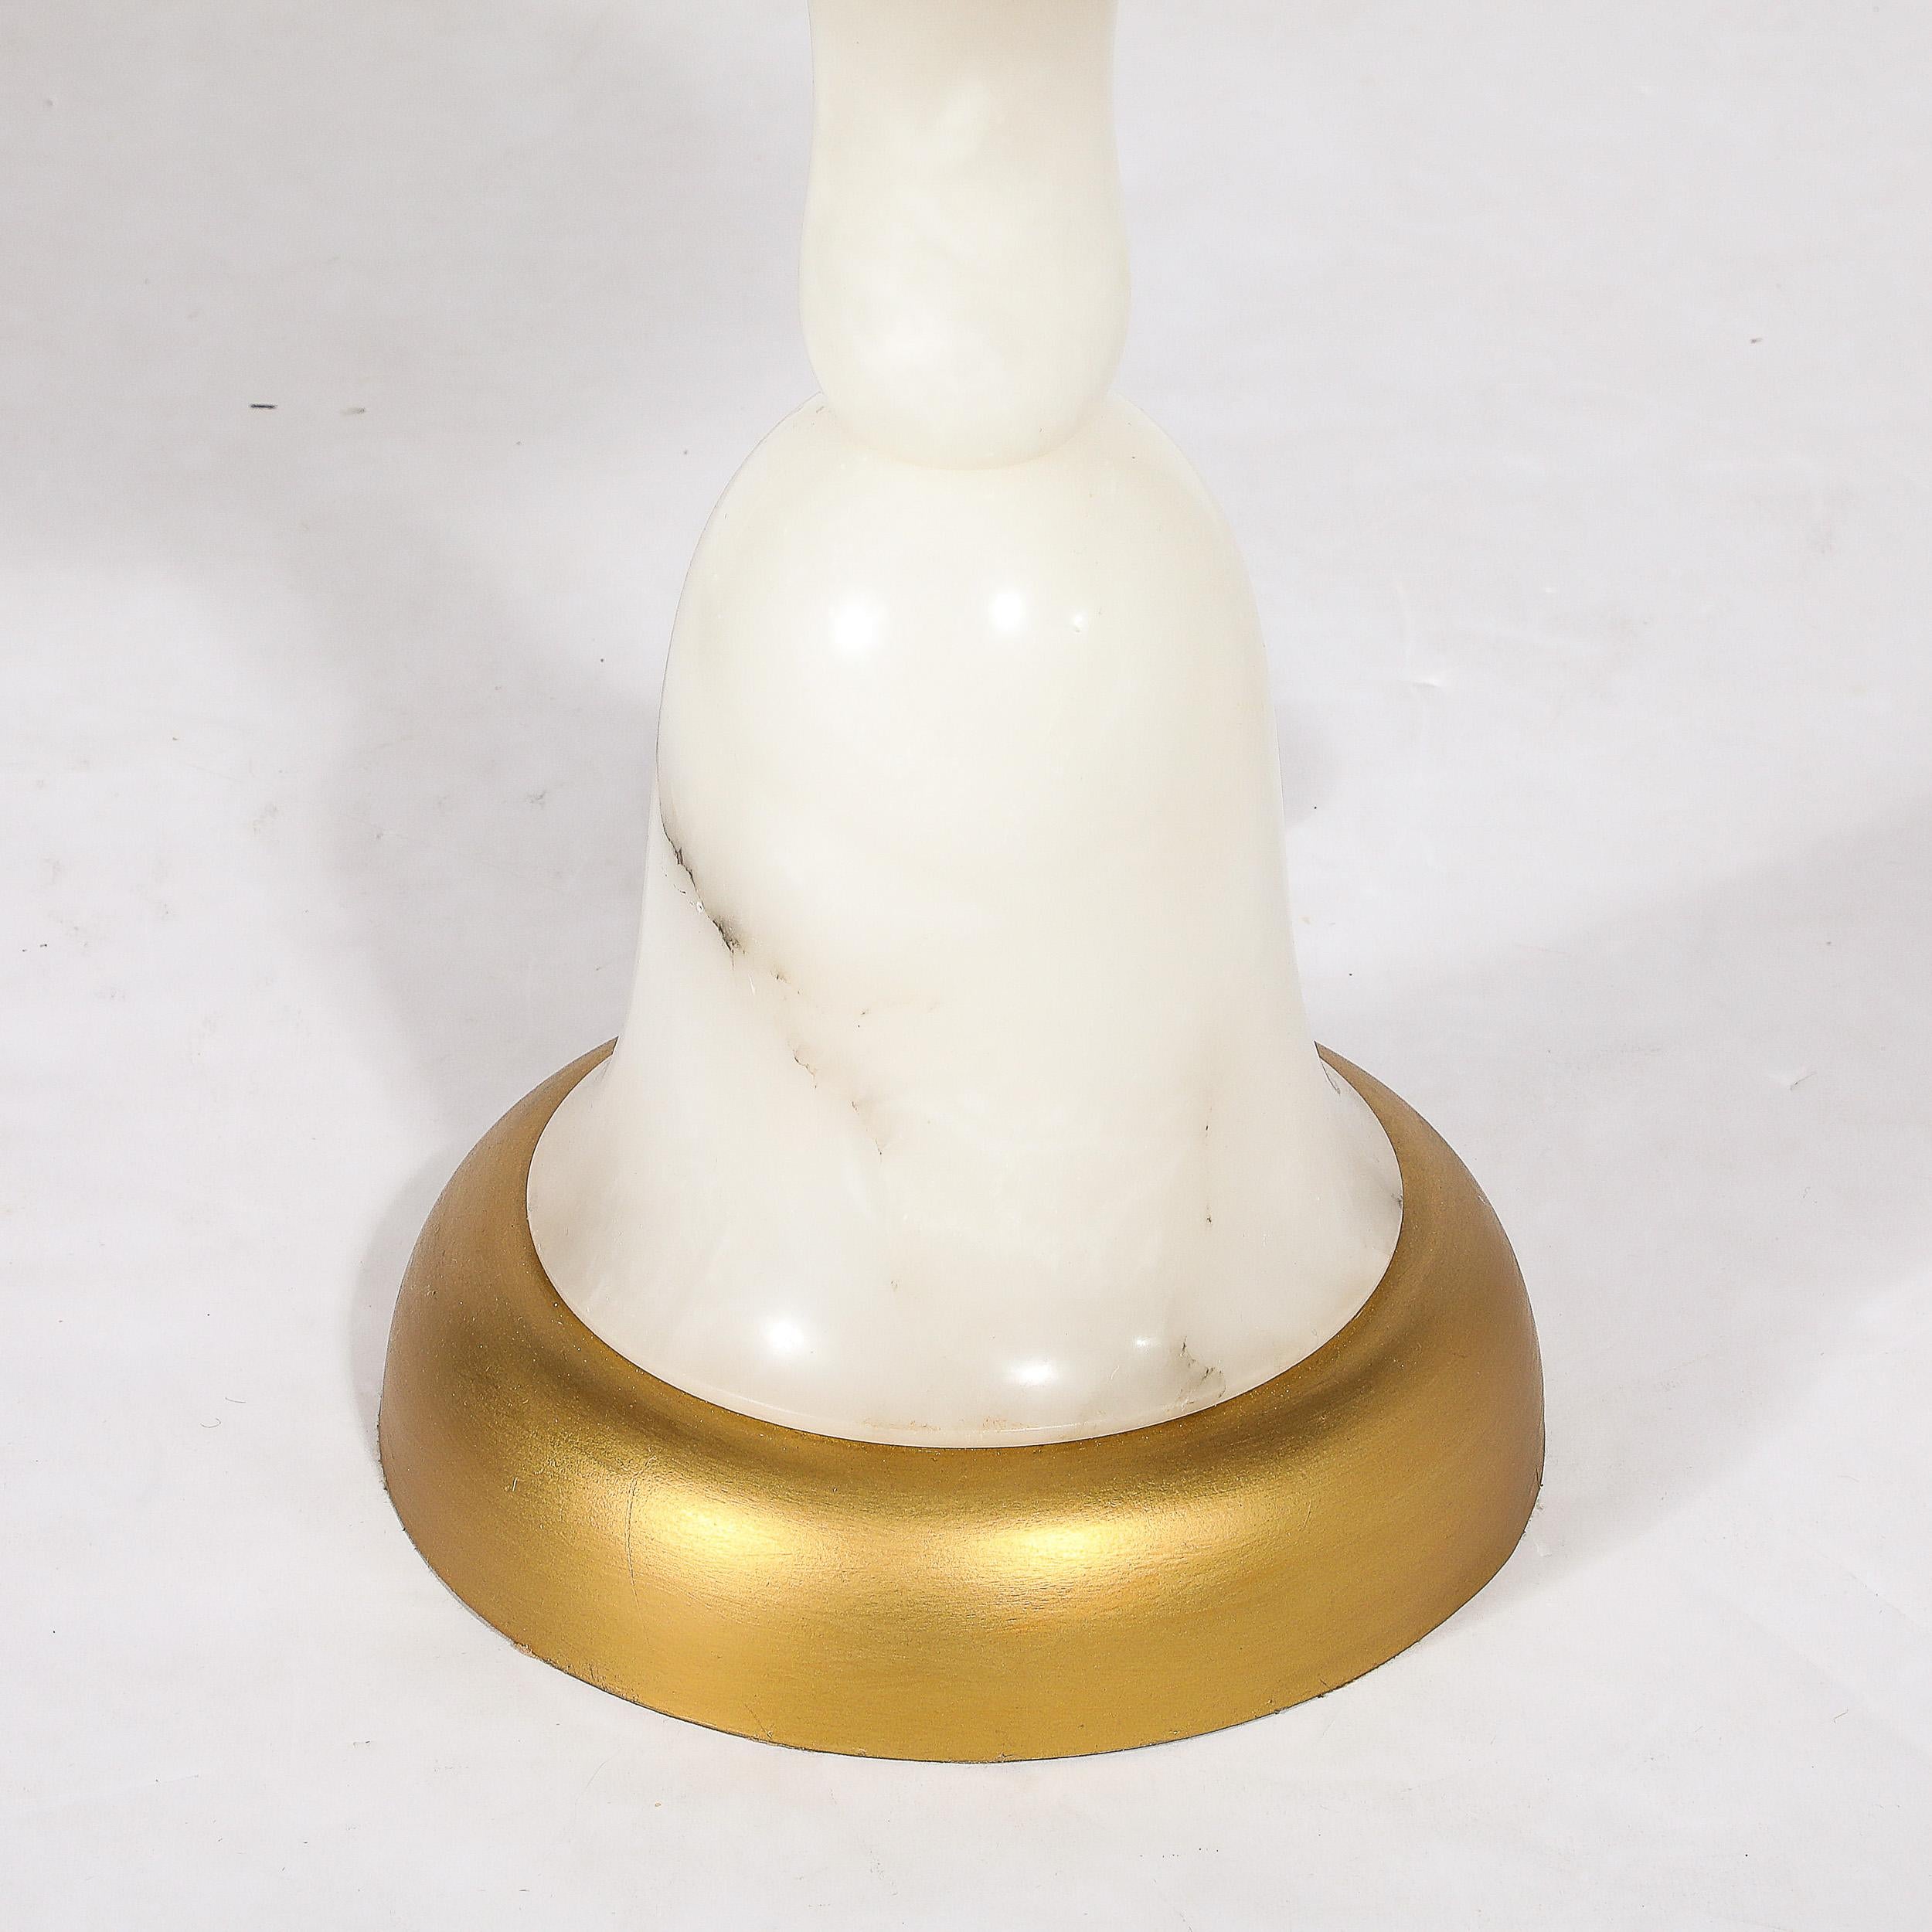 Mid-20th Century Mid-Century Modernist Sculptural Balustrade Form Table Lamp in Carrera Marble For Sale